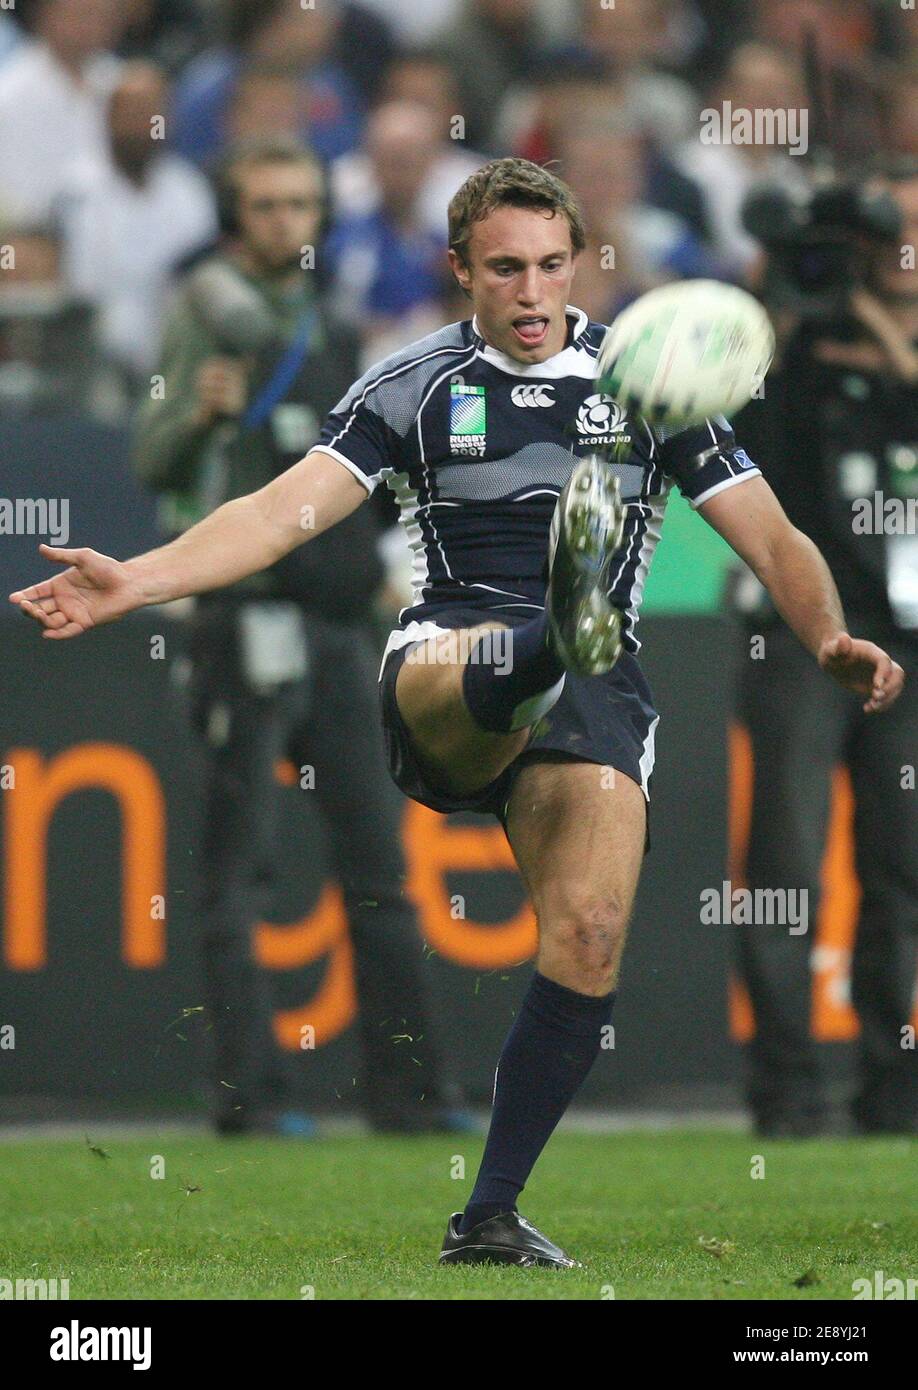 Andrew Henderson of Scotland during the IRB Rugby World Cup 2007, quarter final match Argentina vs Scotland, at the Stade de France,in Saint Denis, near Paris, France on October 7, 2007. Argentina won 19-13. Photo by Gouhier-Taamallah/Cameleon/ABACAPRESS.COM Stock Photo